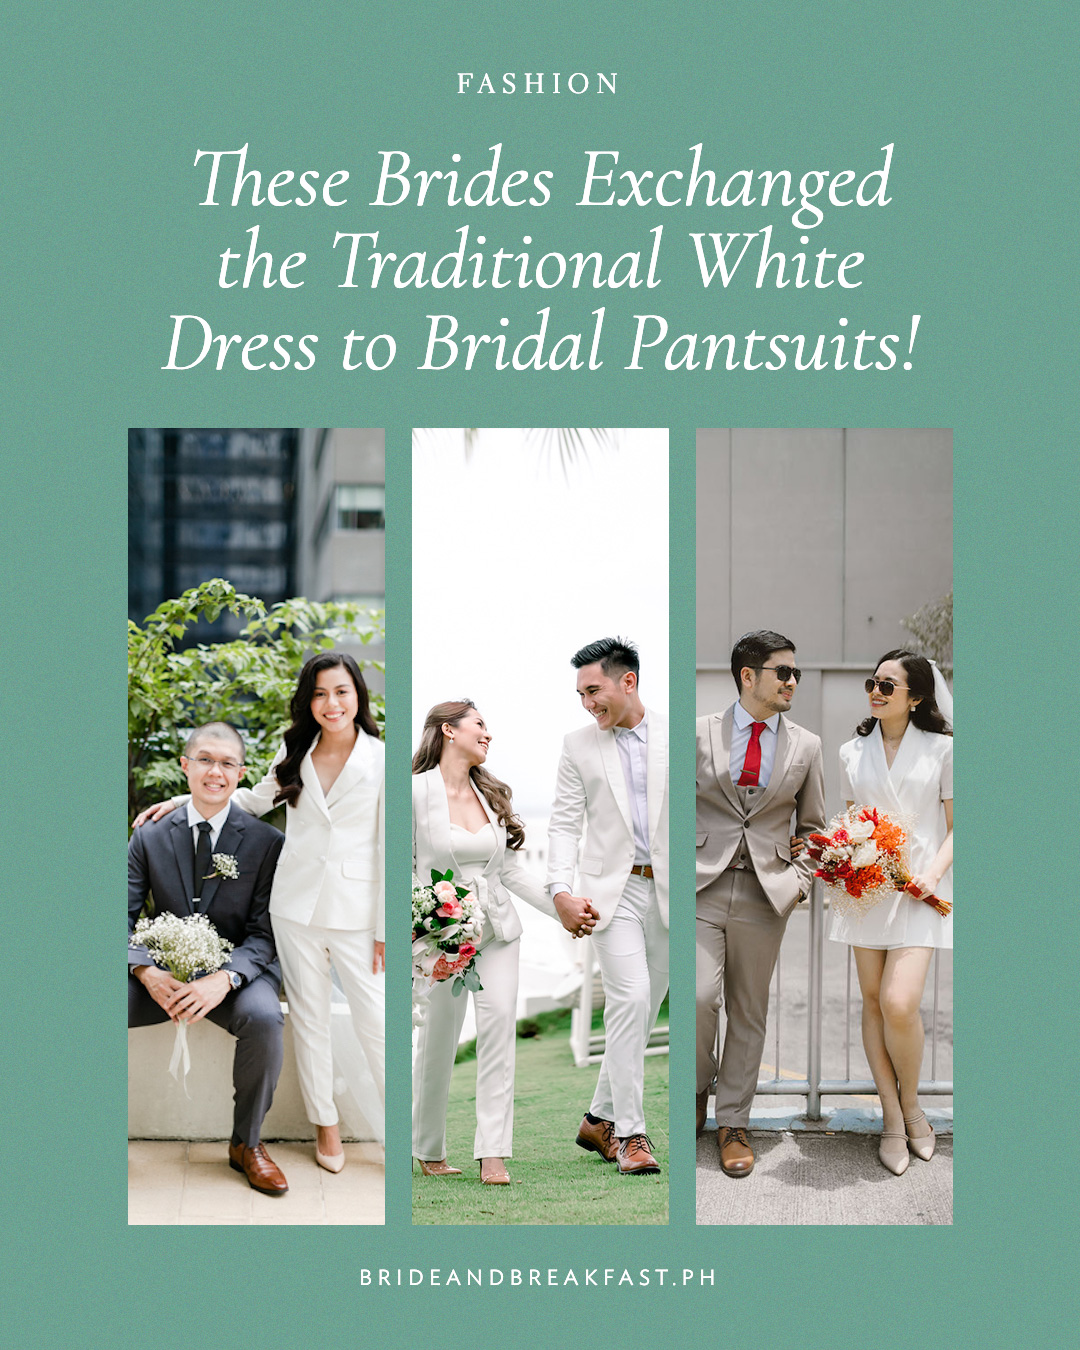 These Brides Exchanged the Traditional White Dress to Bridal Pantsuits!